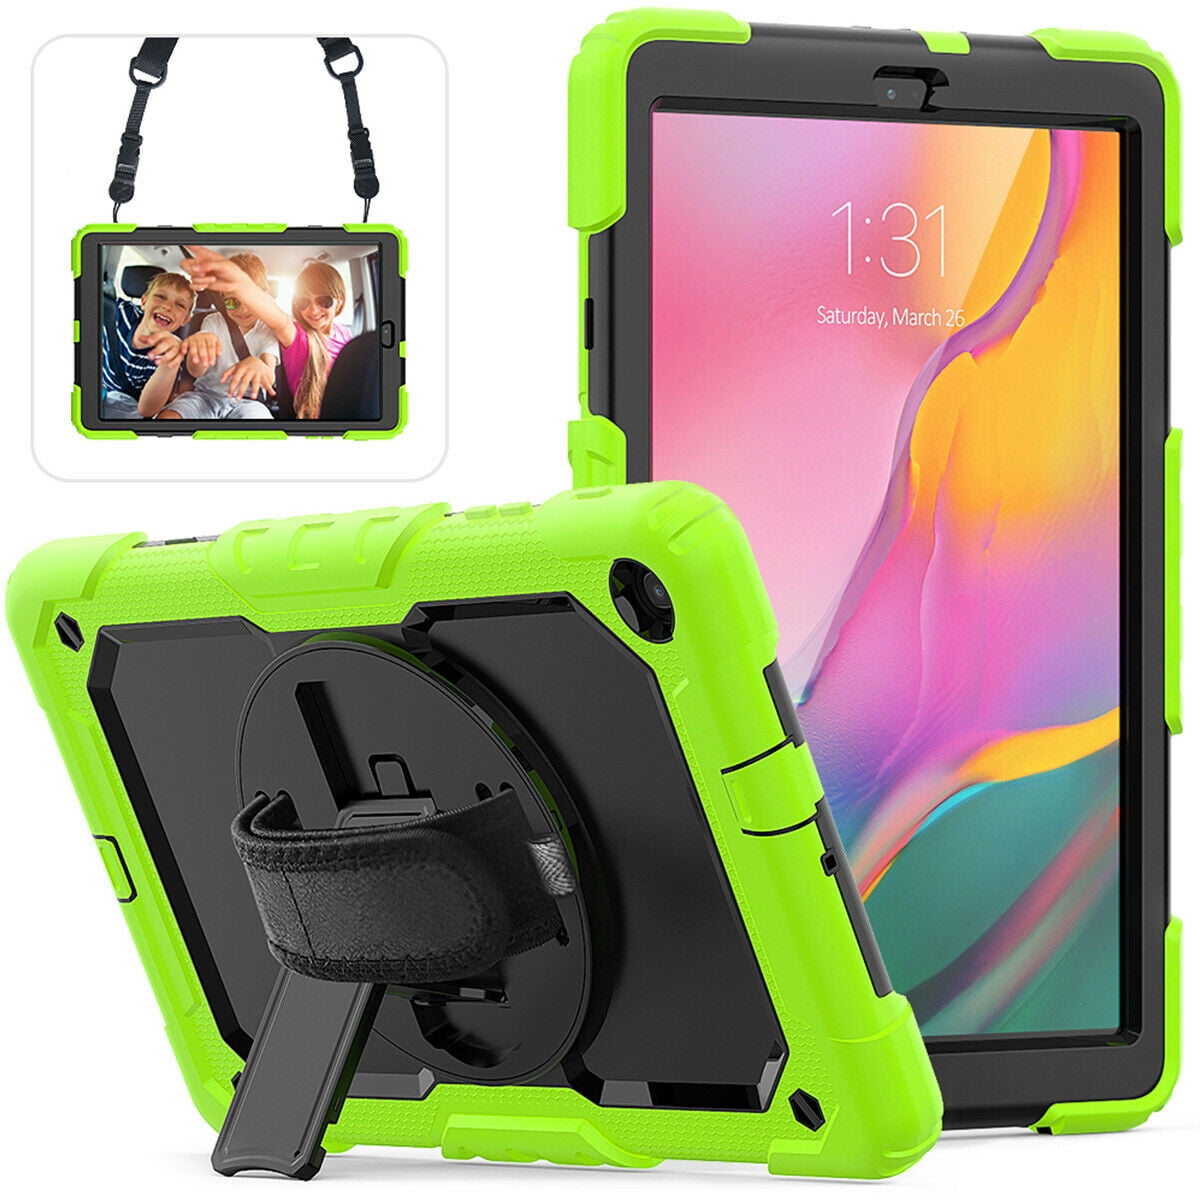 Case for iPad 10.2 Inch 2019 - Dual Layer Protective Hybrid Cover Case